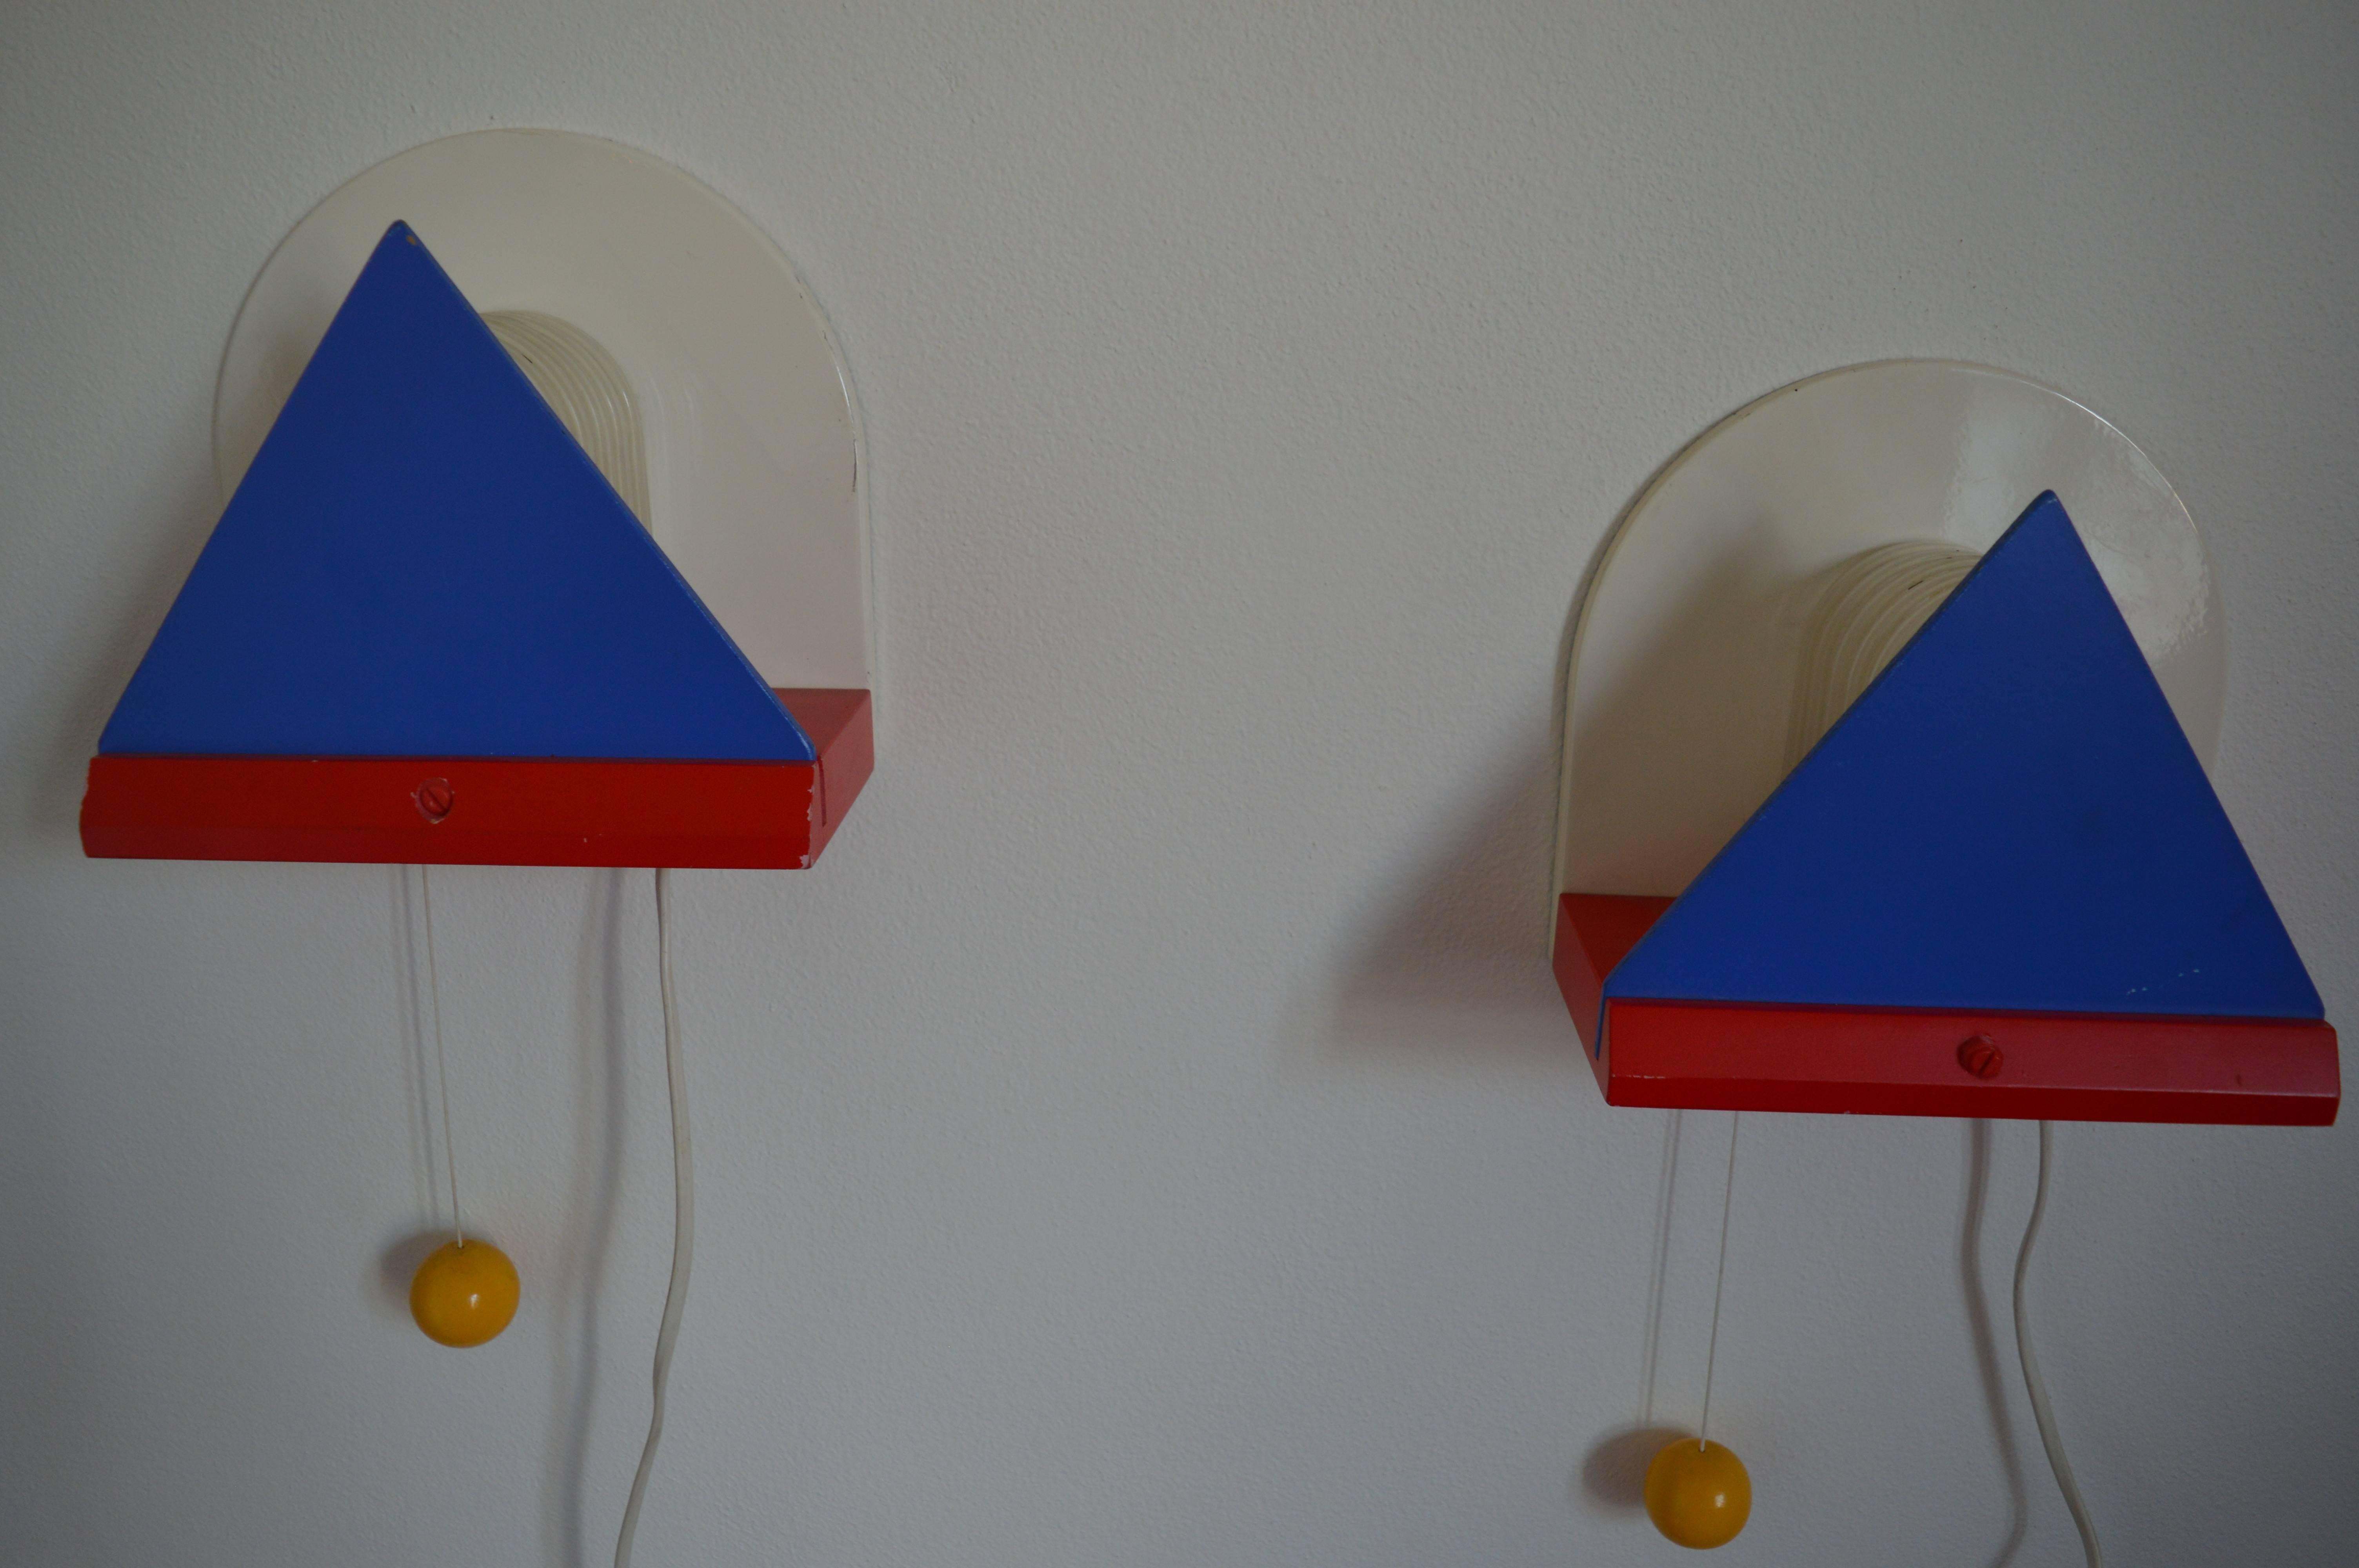 Pair of Post-Modern wall lamps Ikea. Inspired by the Memphis Milano designers.